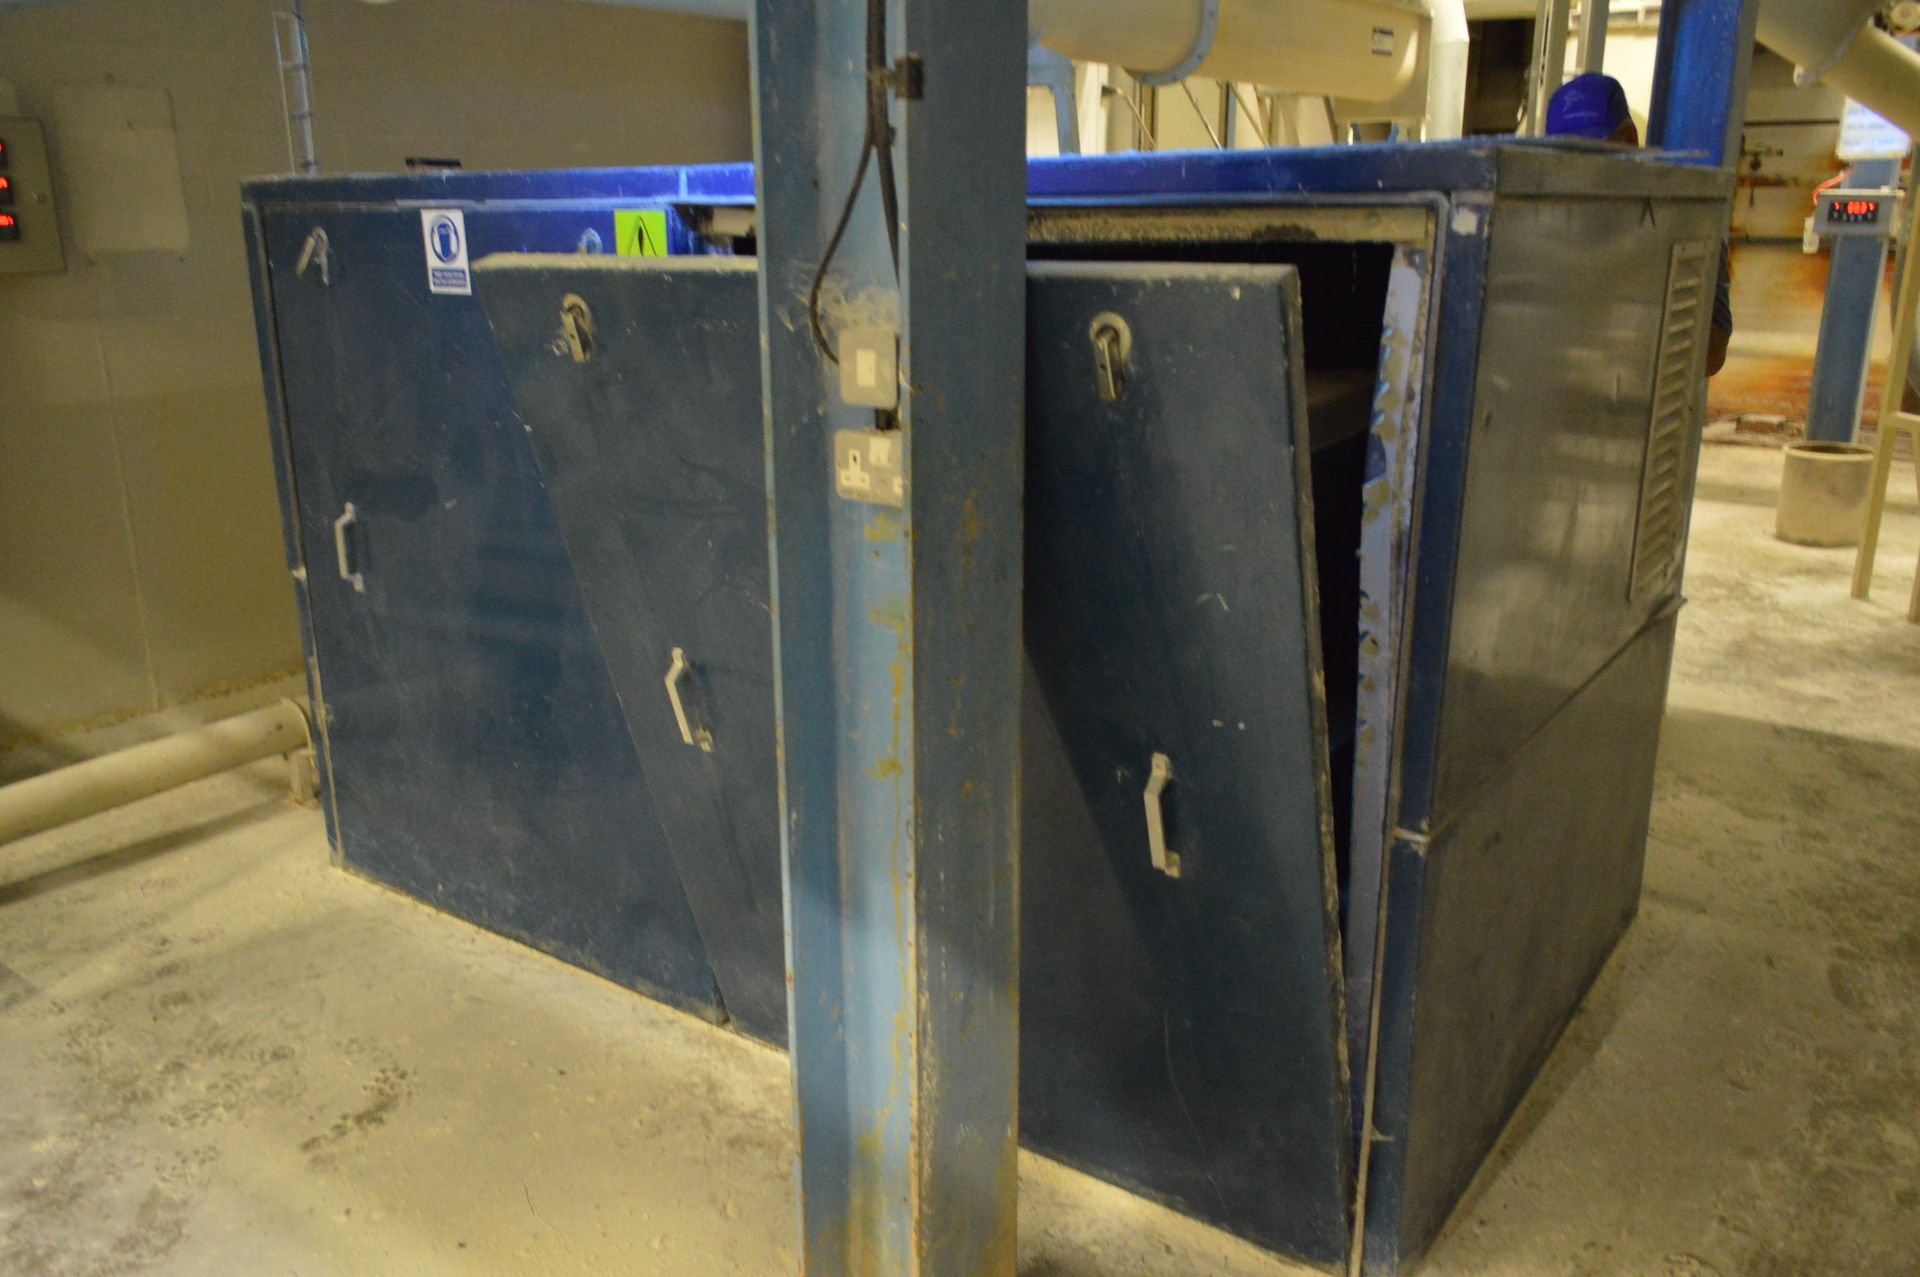 Aerzen Package Blower Unit, with 30kW electric motor and acoustic enclosure (note - this lot is